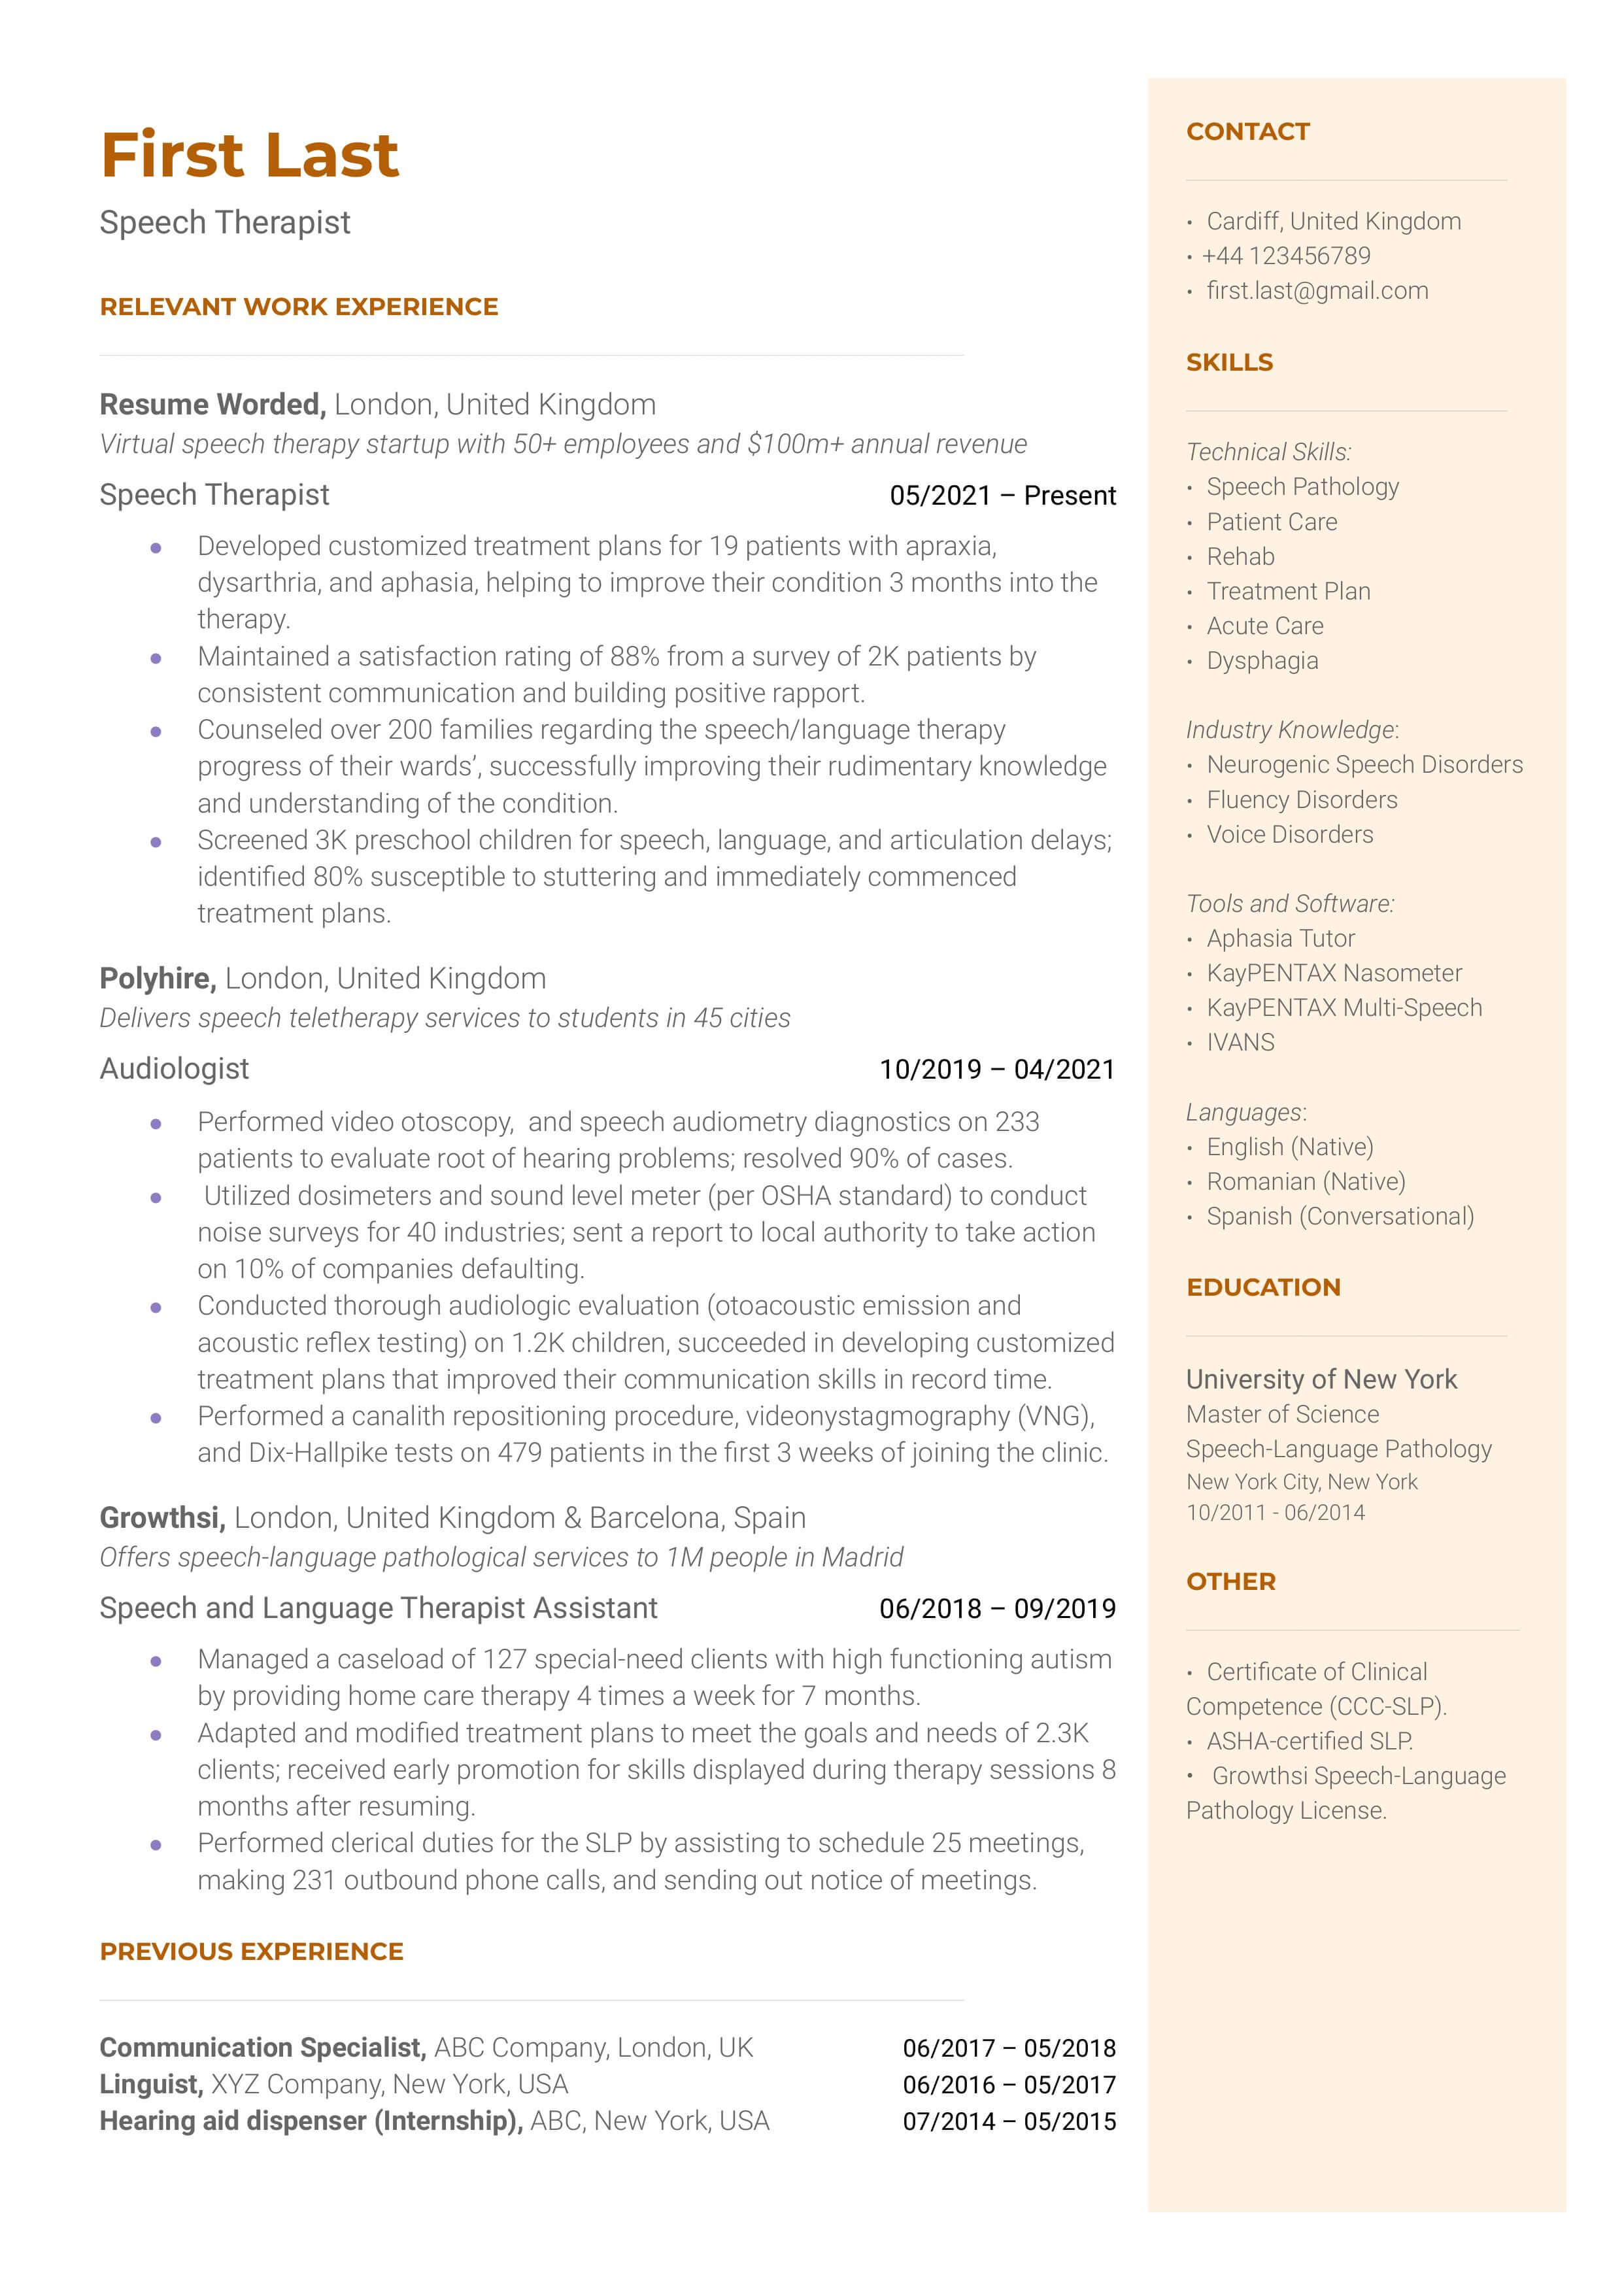 A resume for a speech therapist with a masters degree in speech language pathology and experience as a speech therapist assistant.